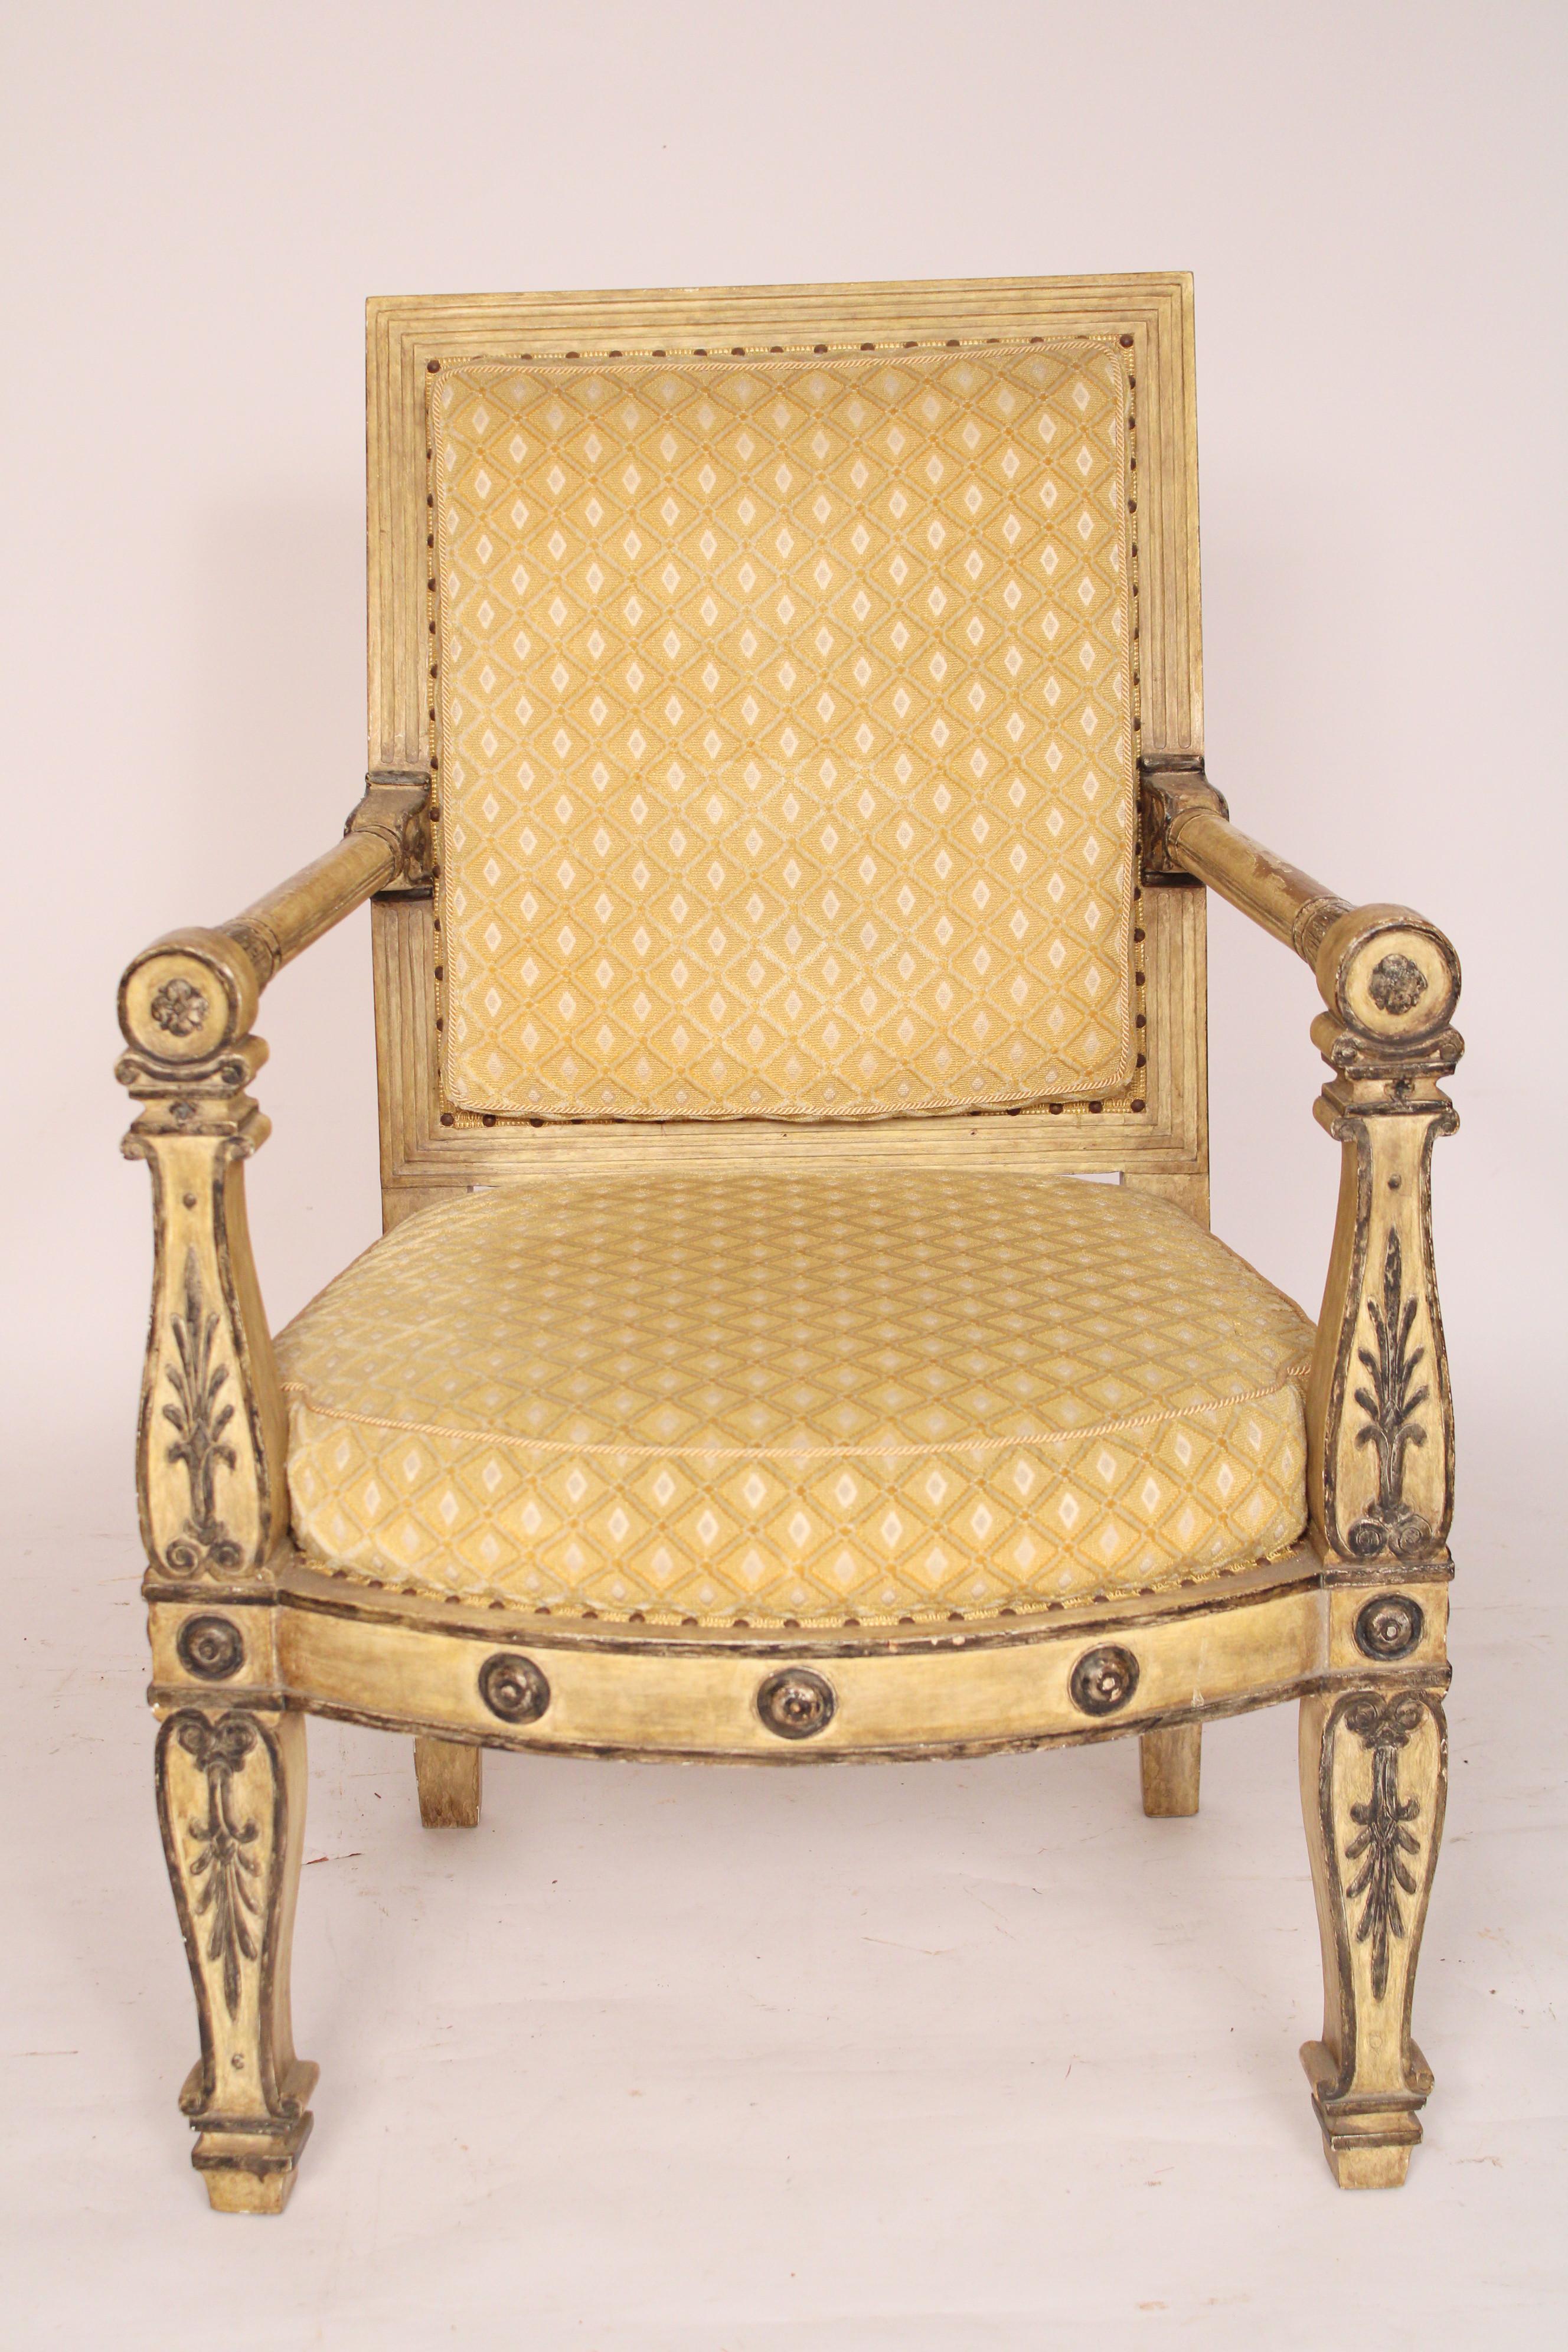 Empire style painted armchair, circa late 20th century. With paint intentionally distressed to imitate age. Attributed to Hendrix and Allardyce, 